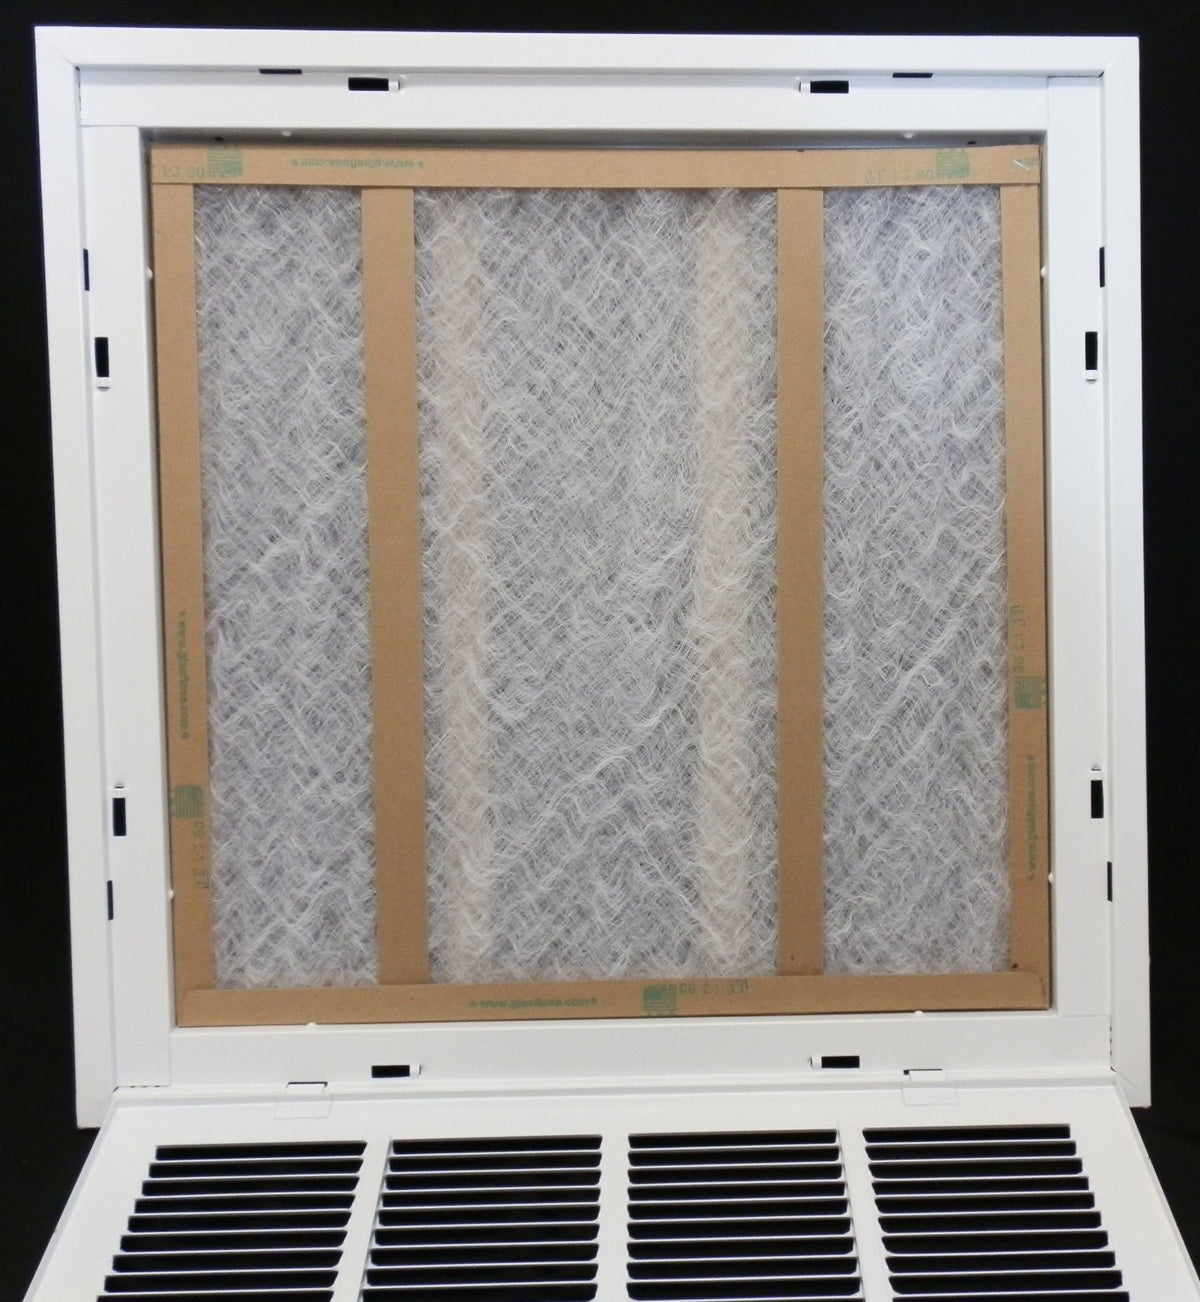 14&quot; X 25&quot; Steel Return Air Filter Grille for 1&quot; Filter - Removable Frame - [Outer Dimensions: 16 5/8&quot; X 27 5/8&quot;]